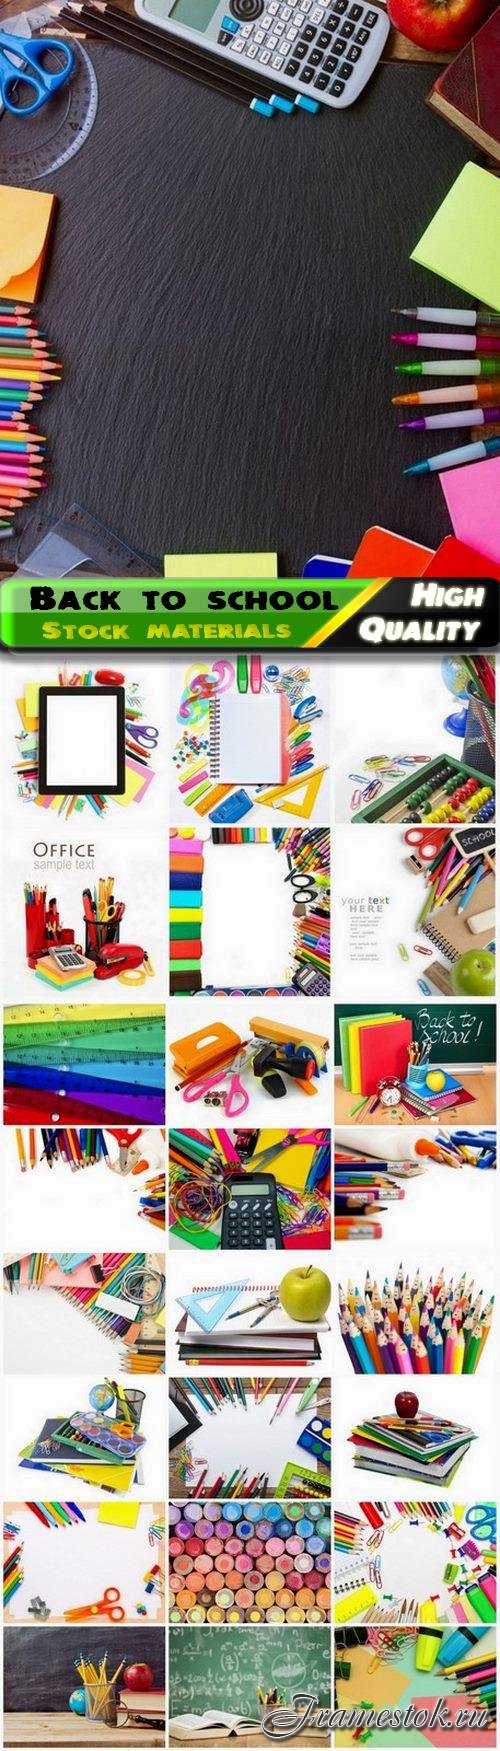 Back to school and stationery product for education - 25 HQ Jpg